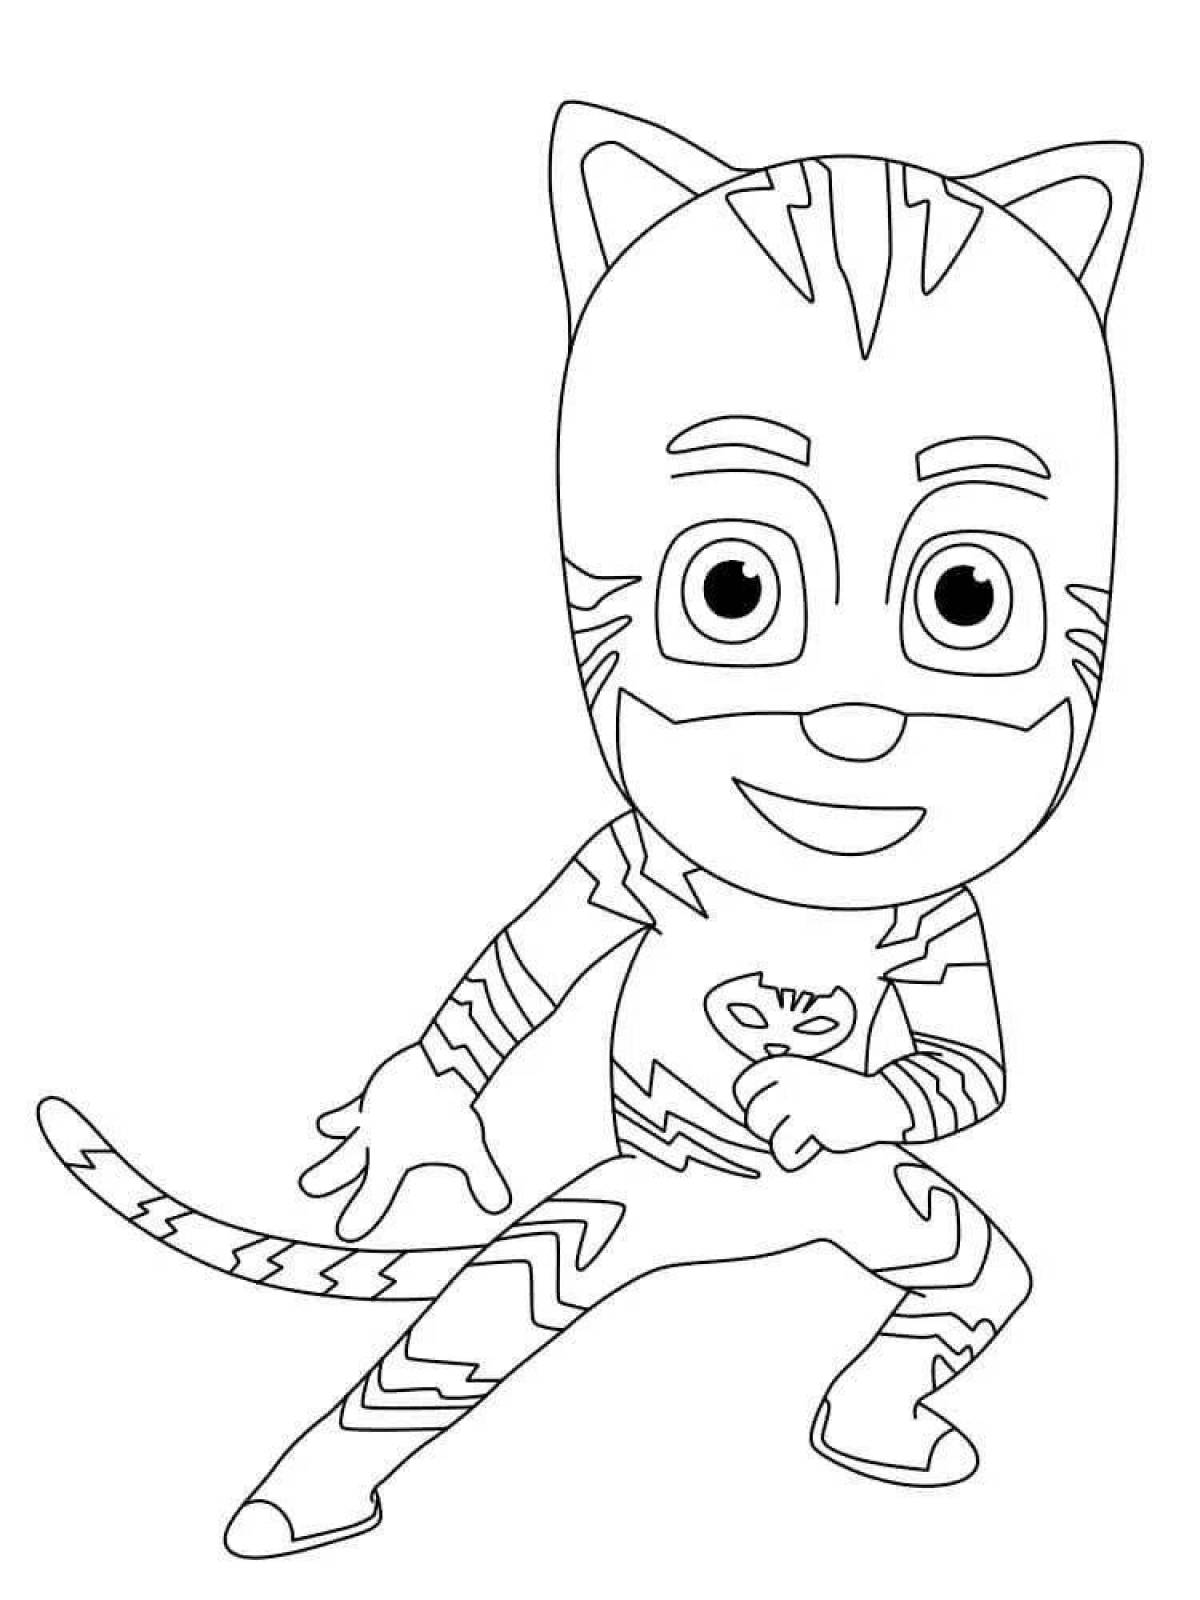 Magical masked heroes coloring page